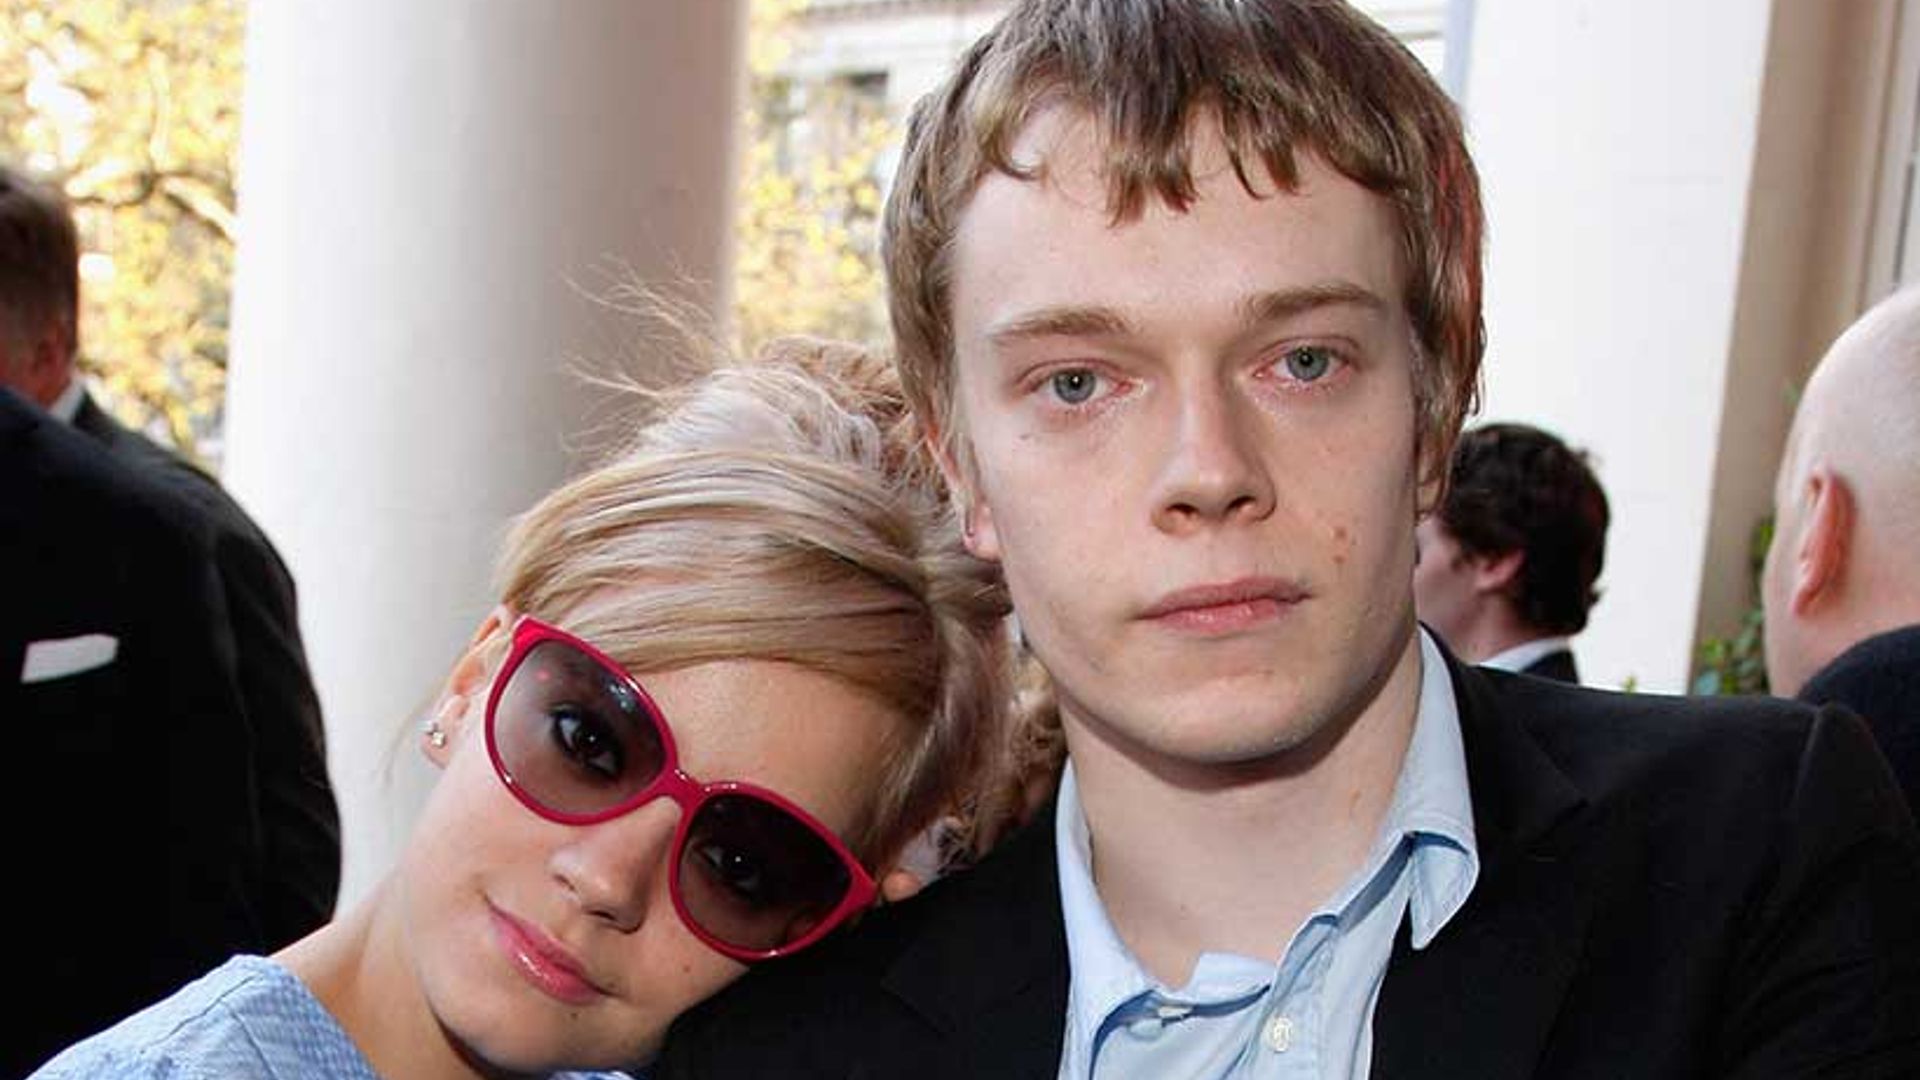 Lily Allen fans had HILARIOUS reaction to her brother Alfie Allen's Emmy nomination